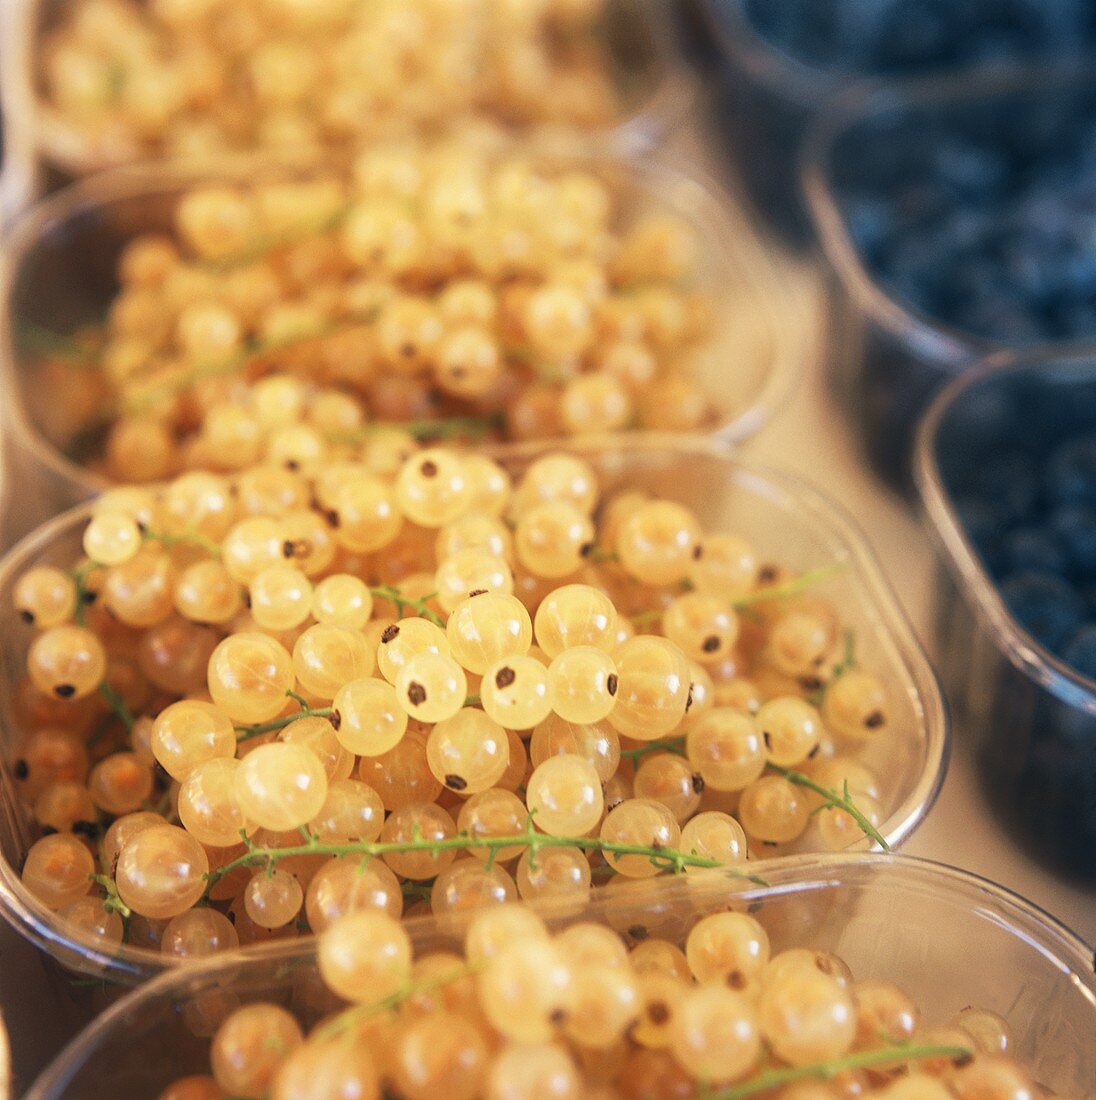 White Currants in Plastic Containers